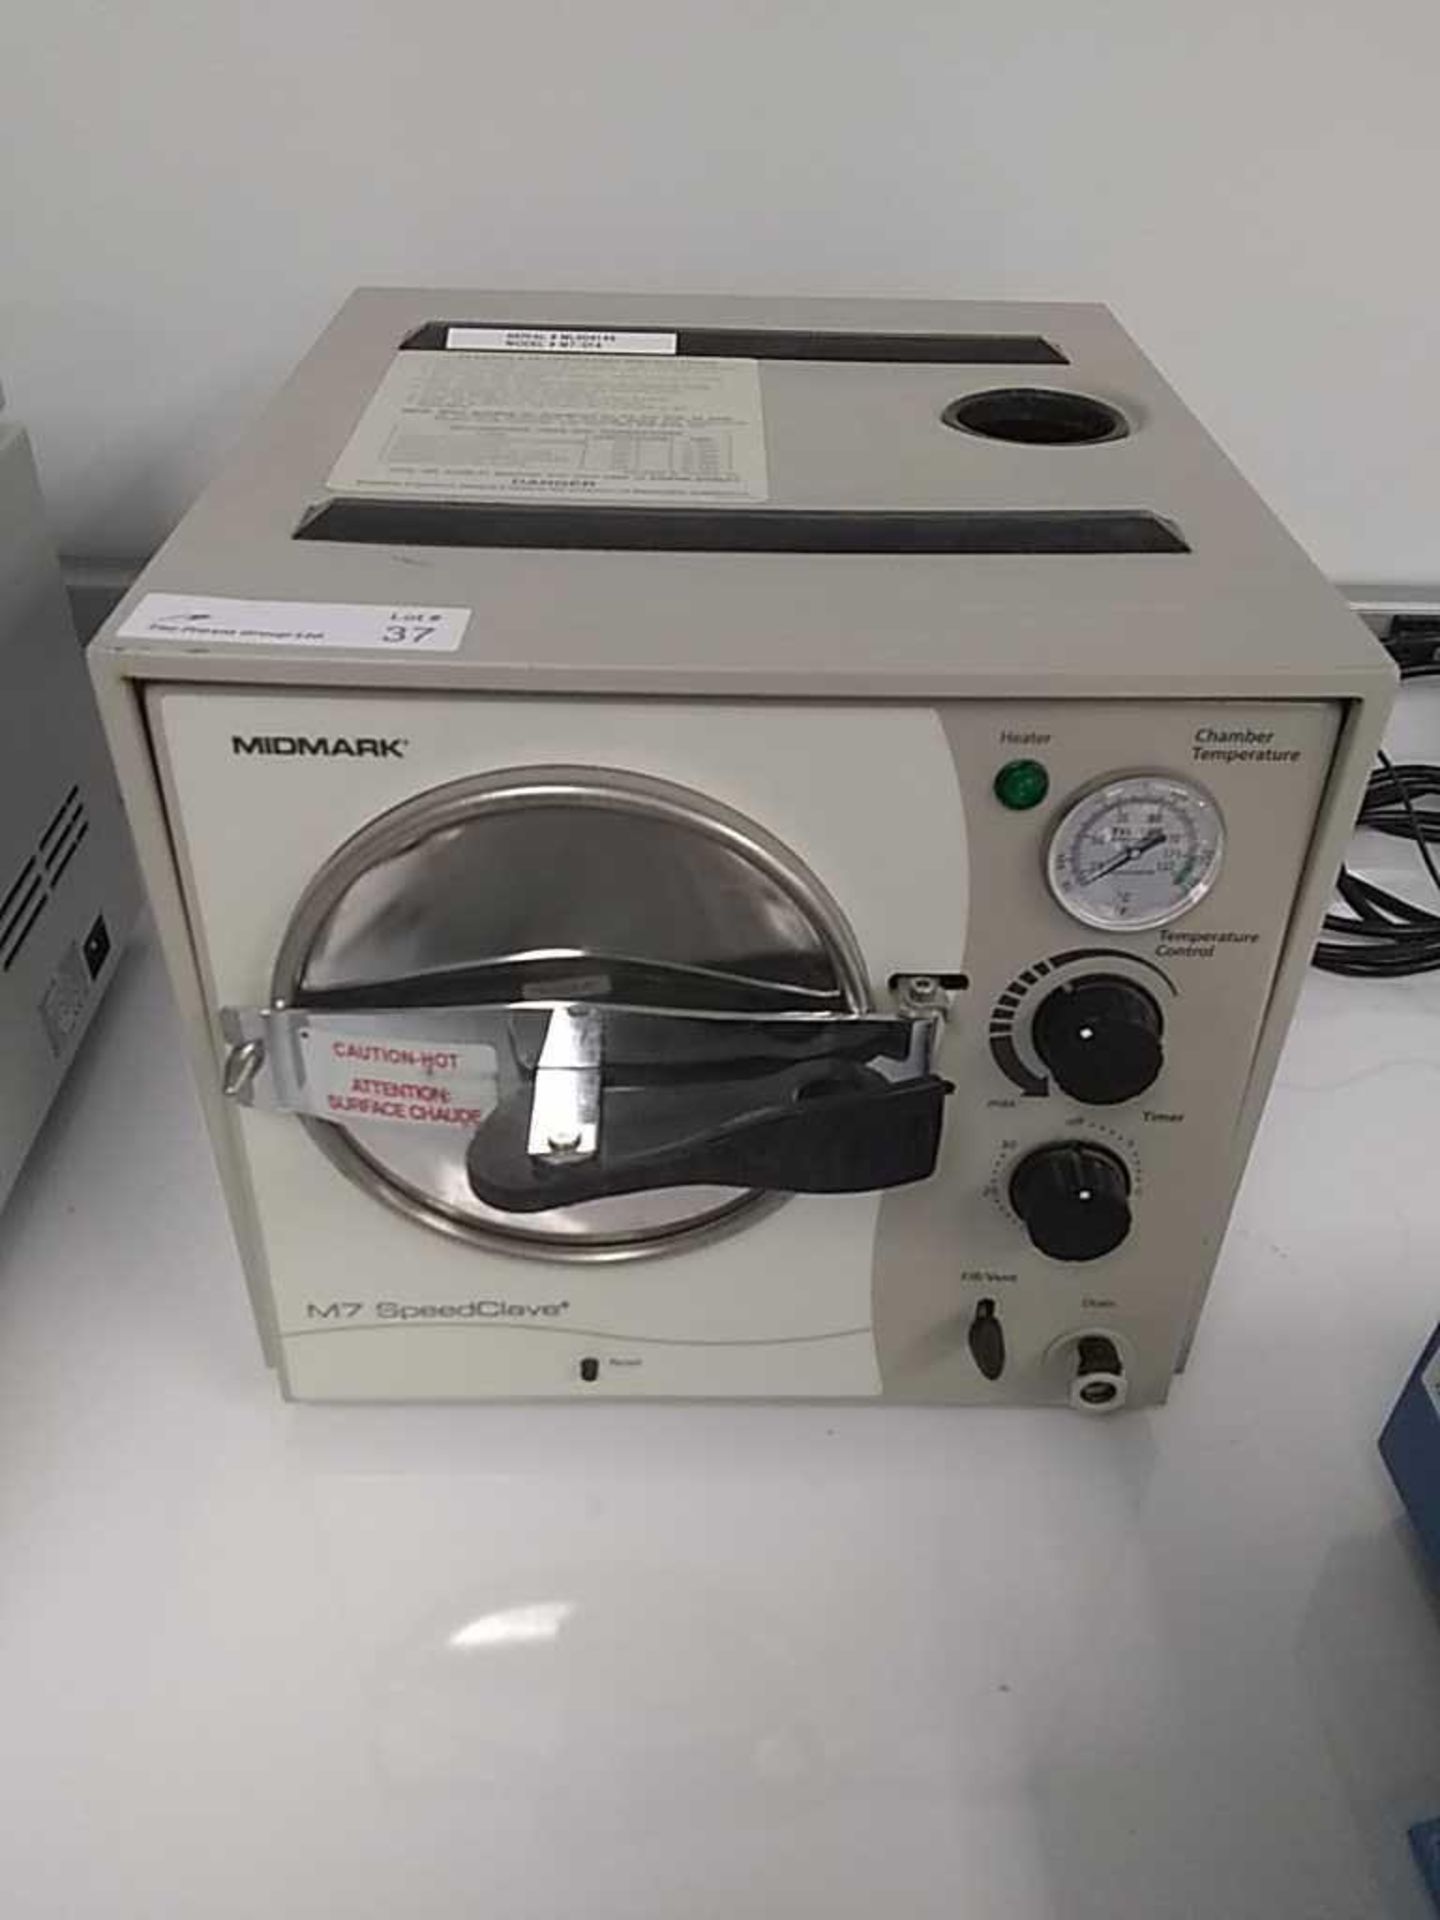 Midmark Model M7 SpeedClave Benchtop Autoclave - Image 2 of 6